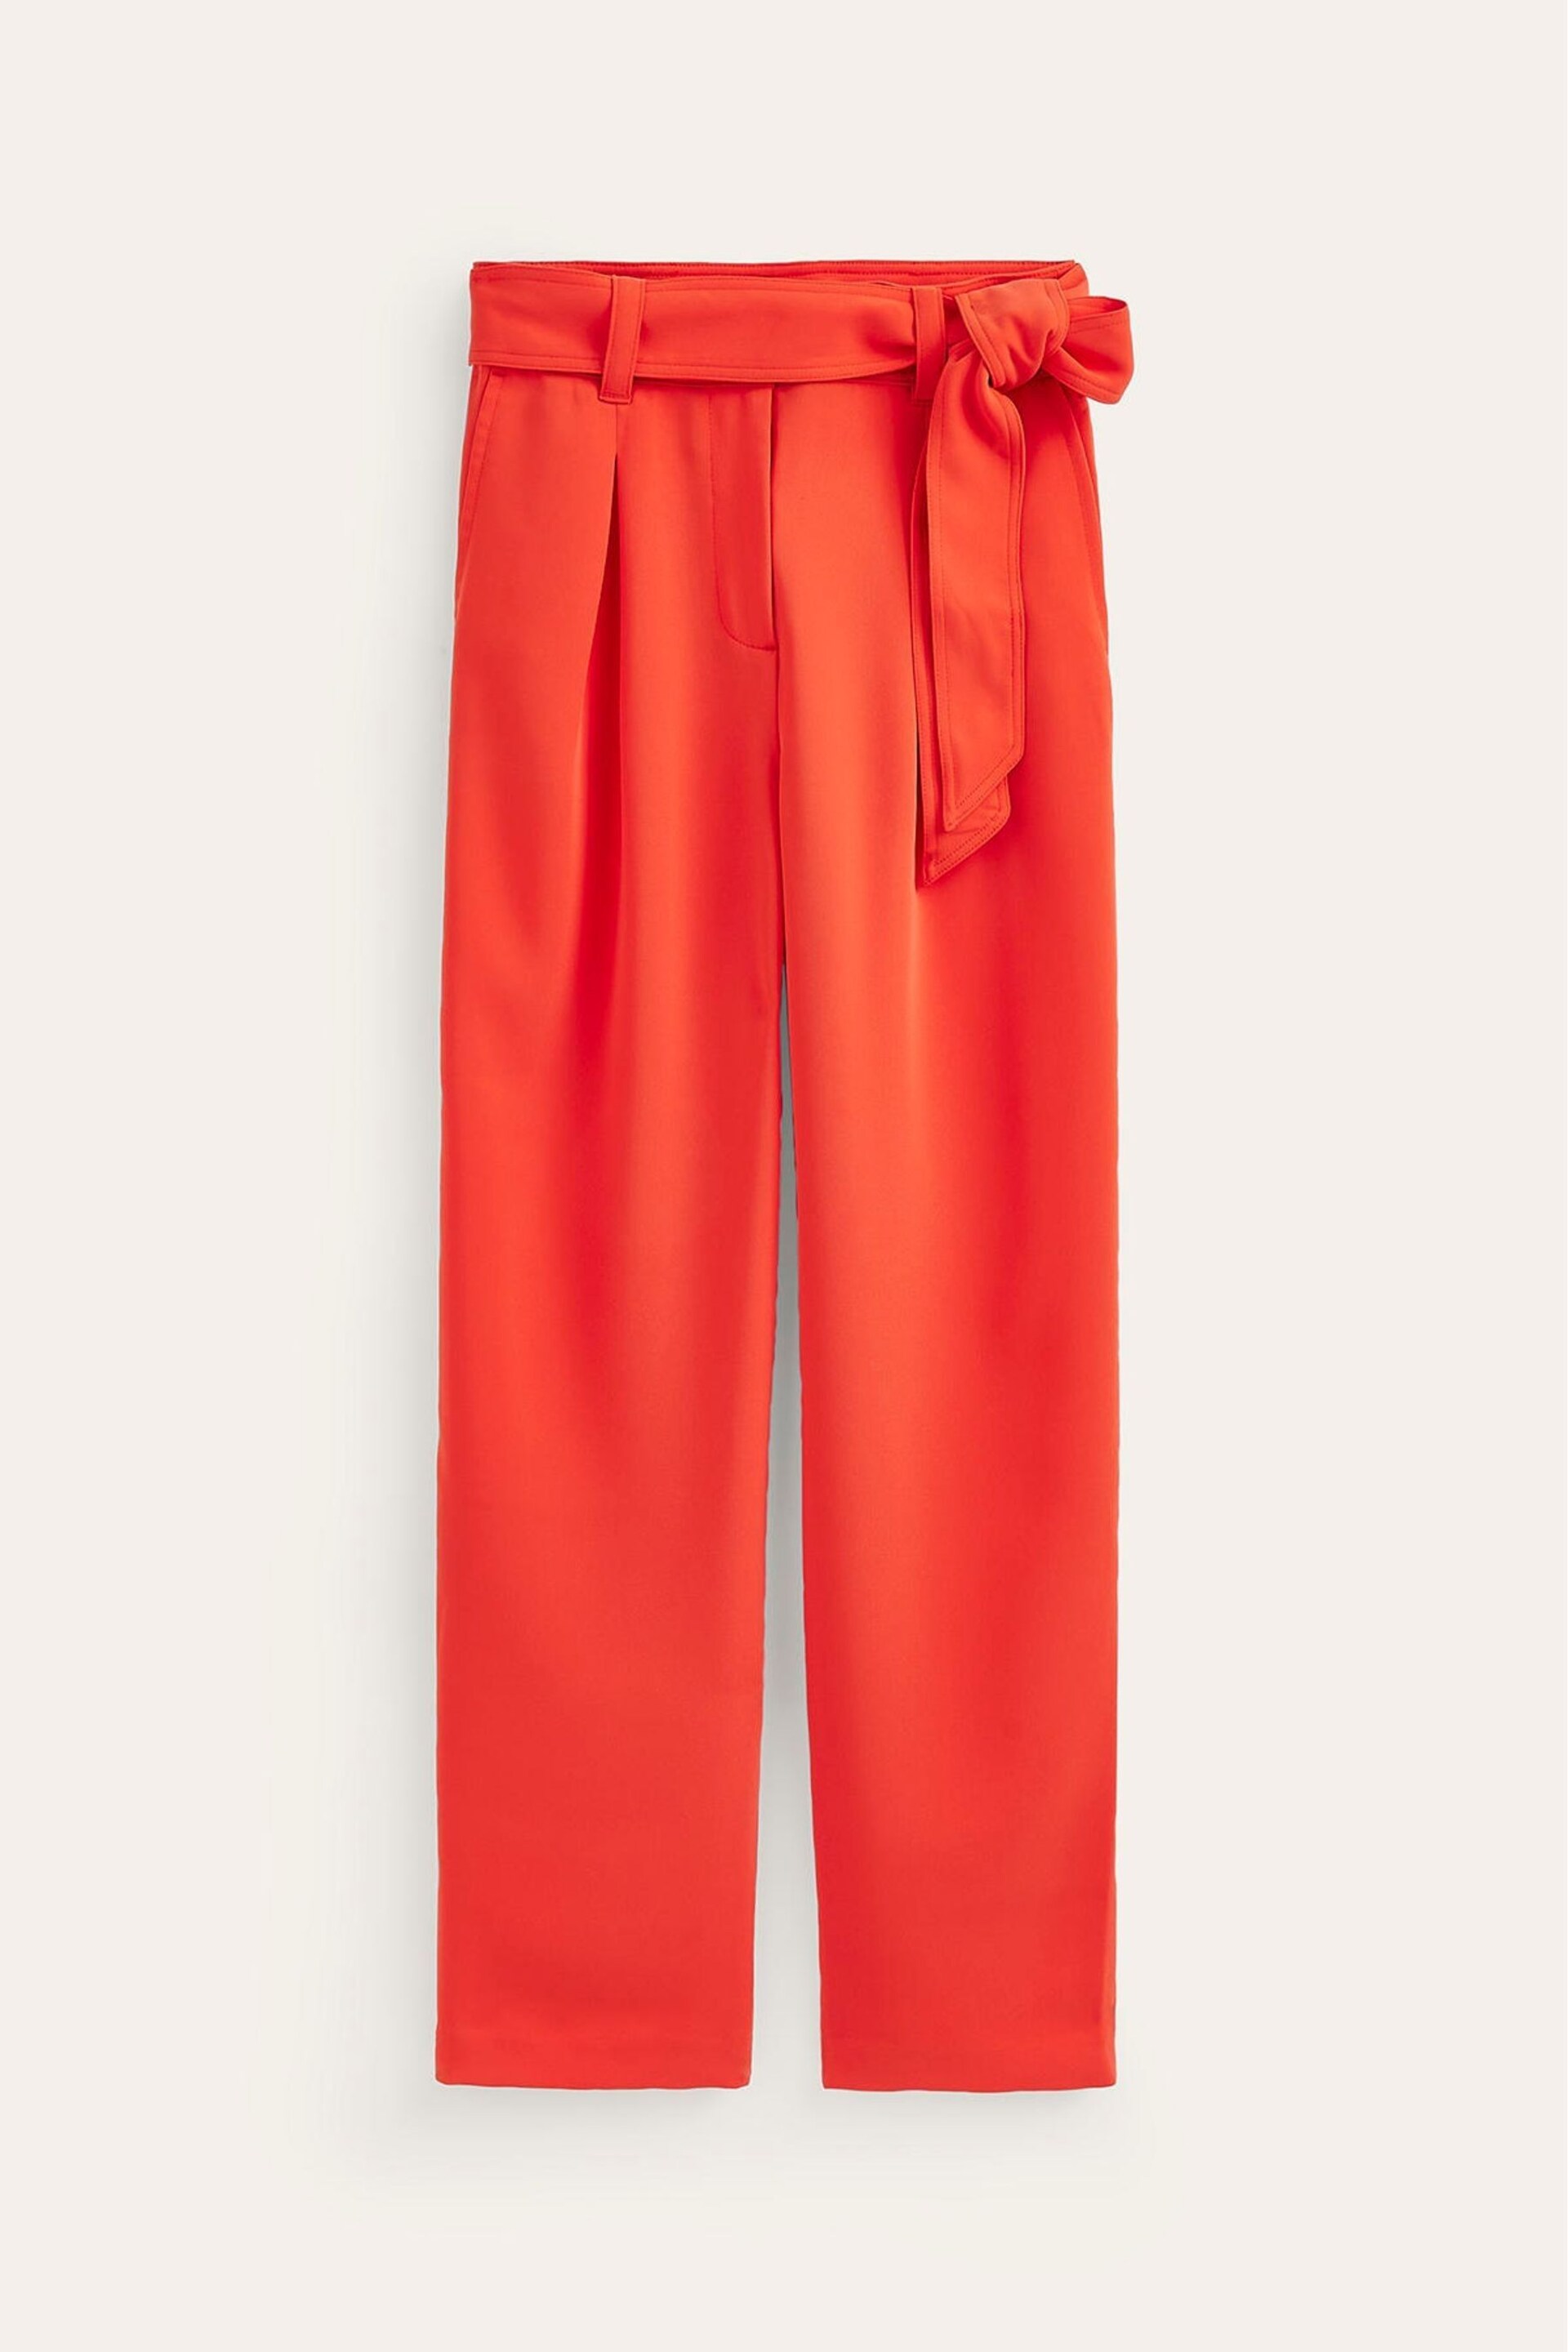 Boden Red Petite Tapered Tie Waist Trousers - Image 5 of 5